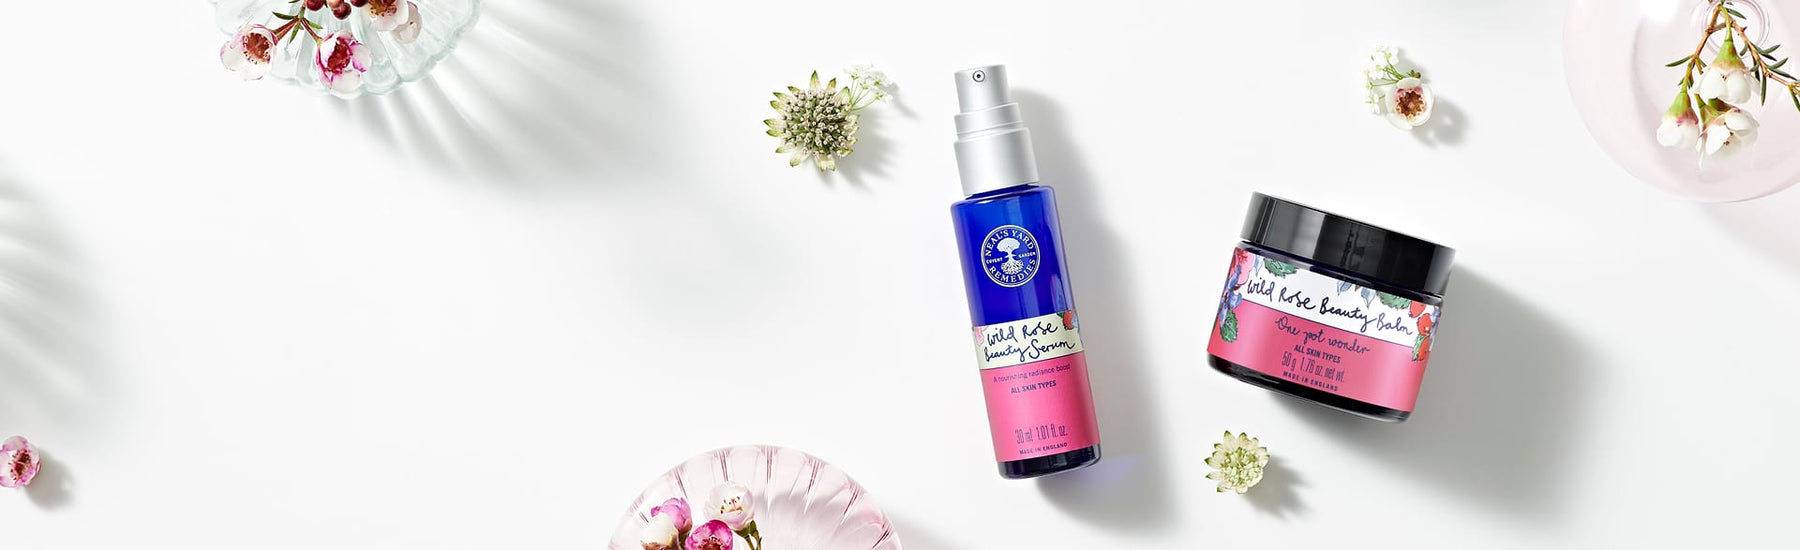 Picture of the award winning Wild Rose Beauty Balm and Beauty Serum with botanical background by Neal's Yard Remedies